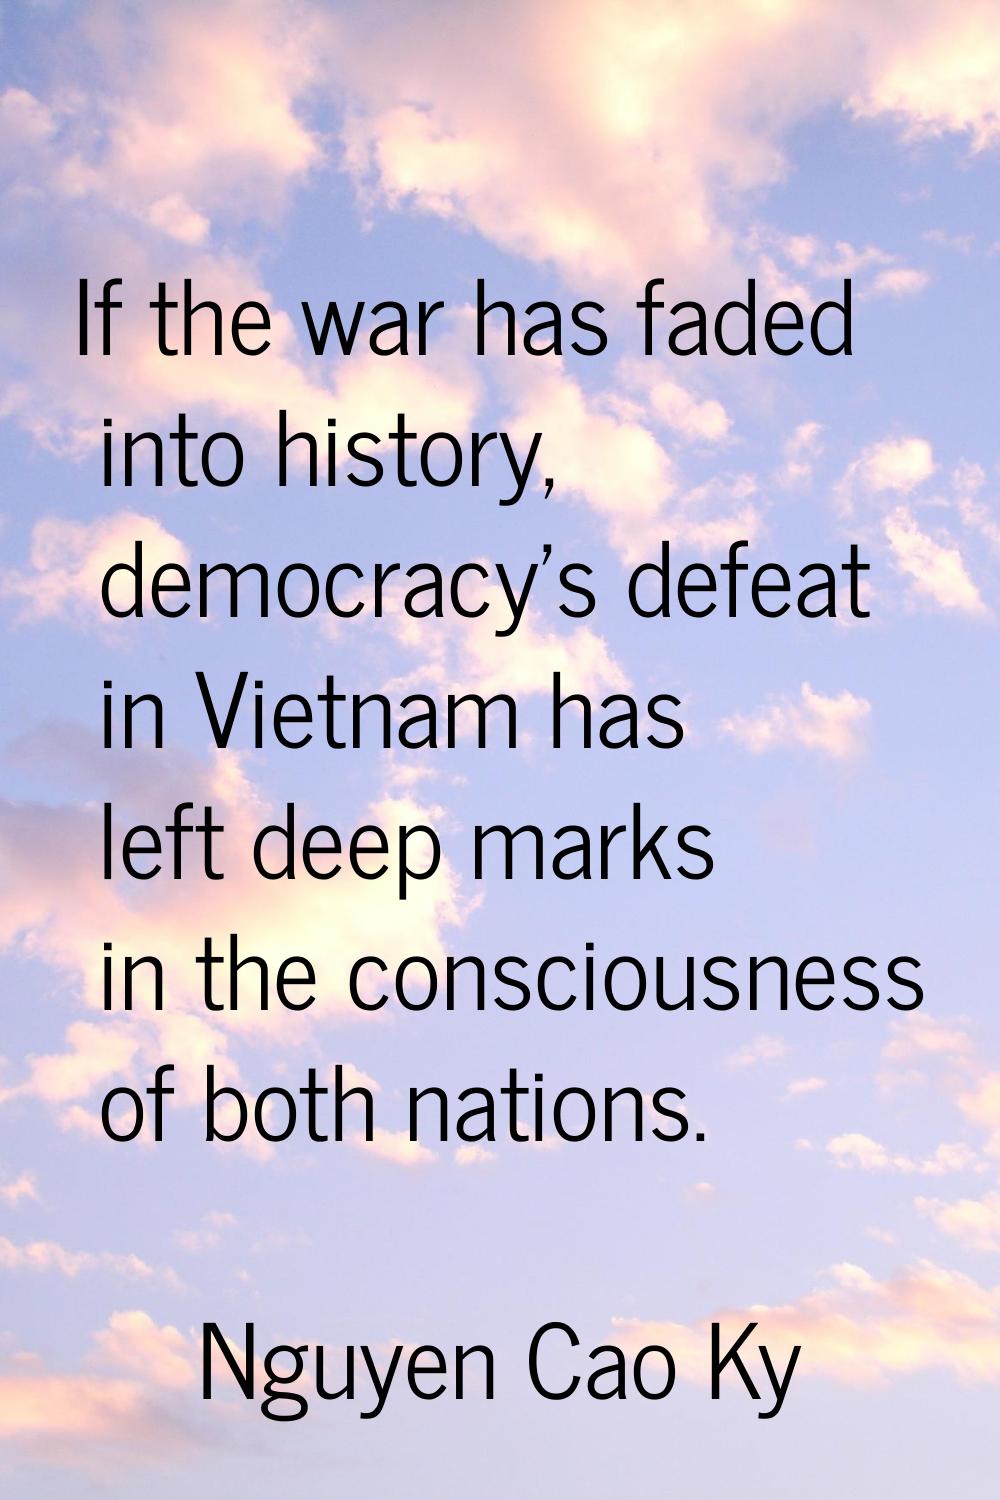 If the war has faded into history, democracy's defeat in Vietnam has left deep marks in the conscio